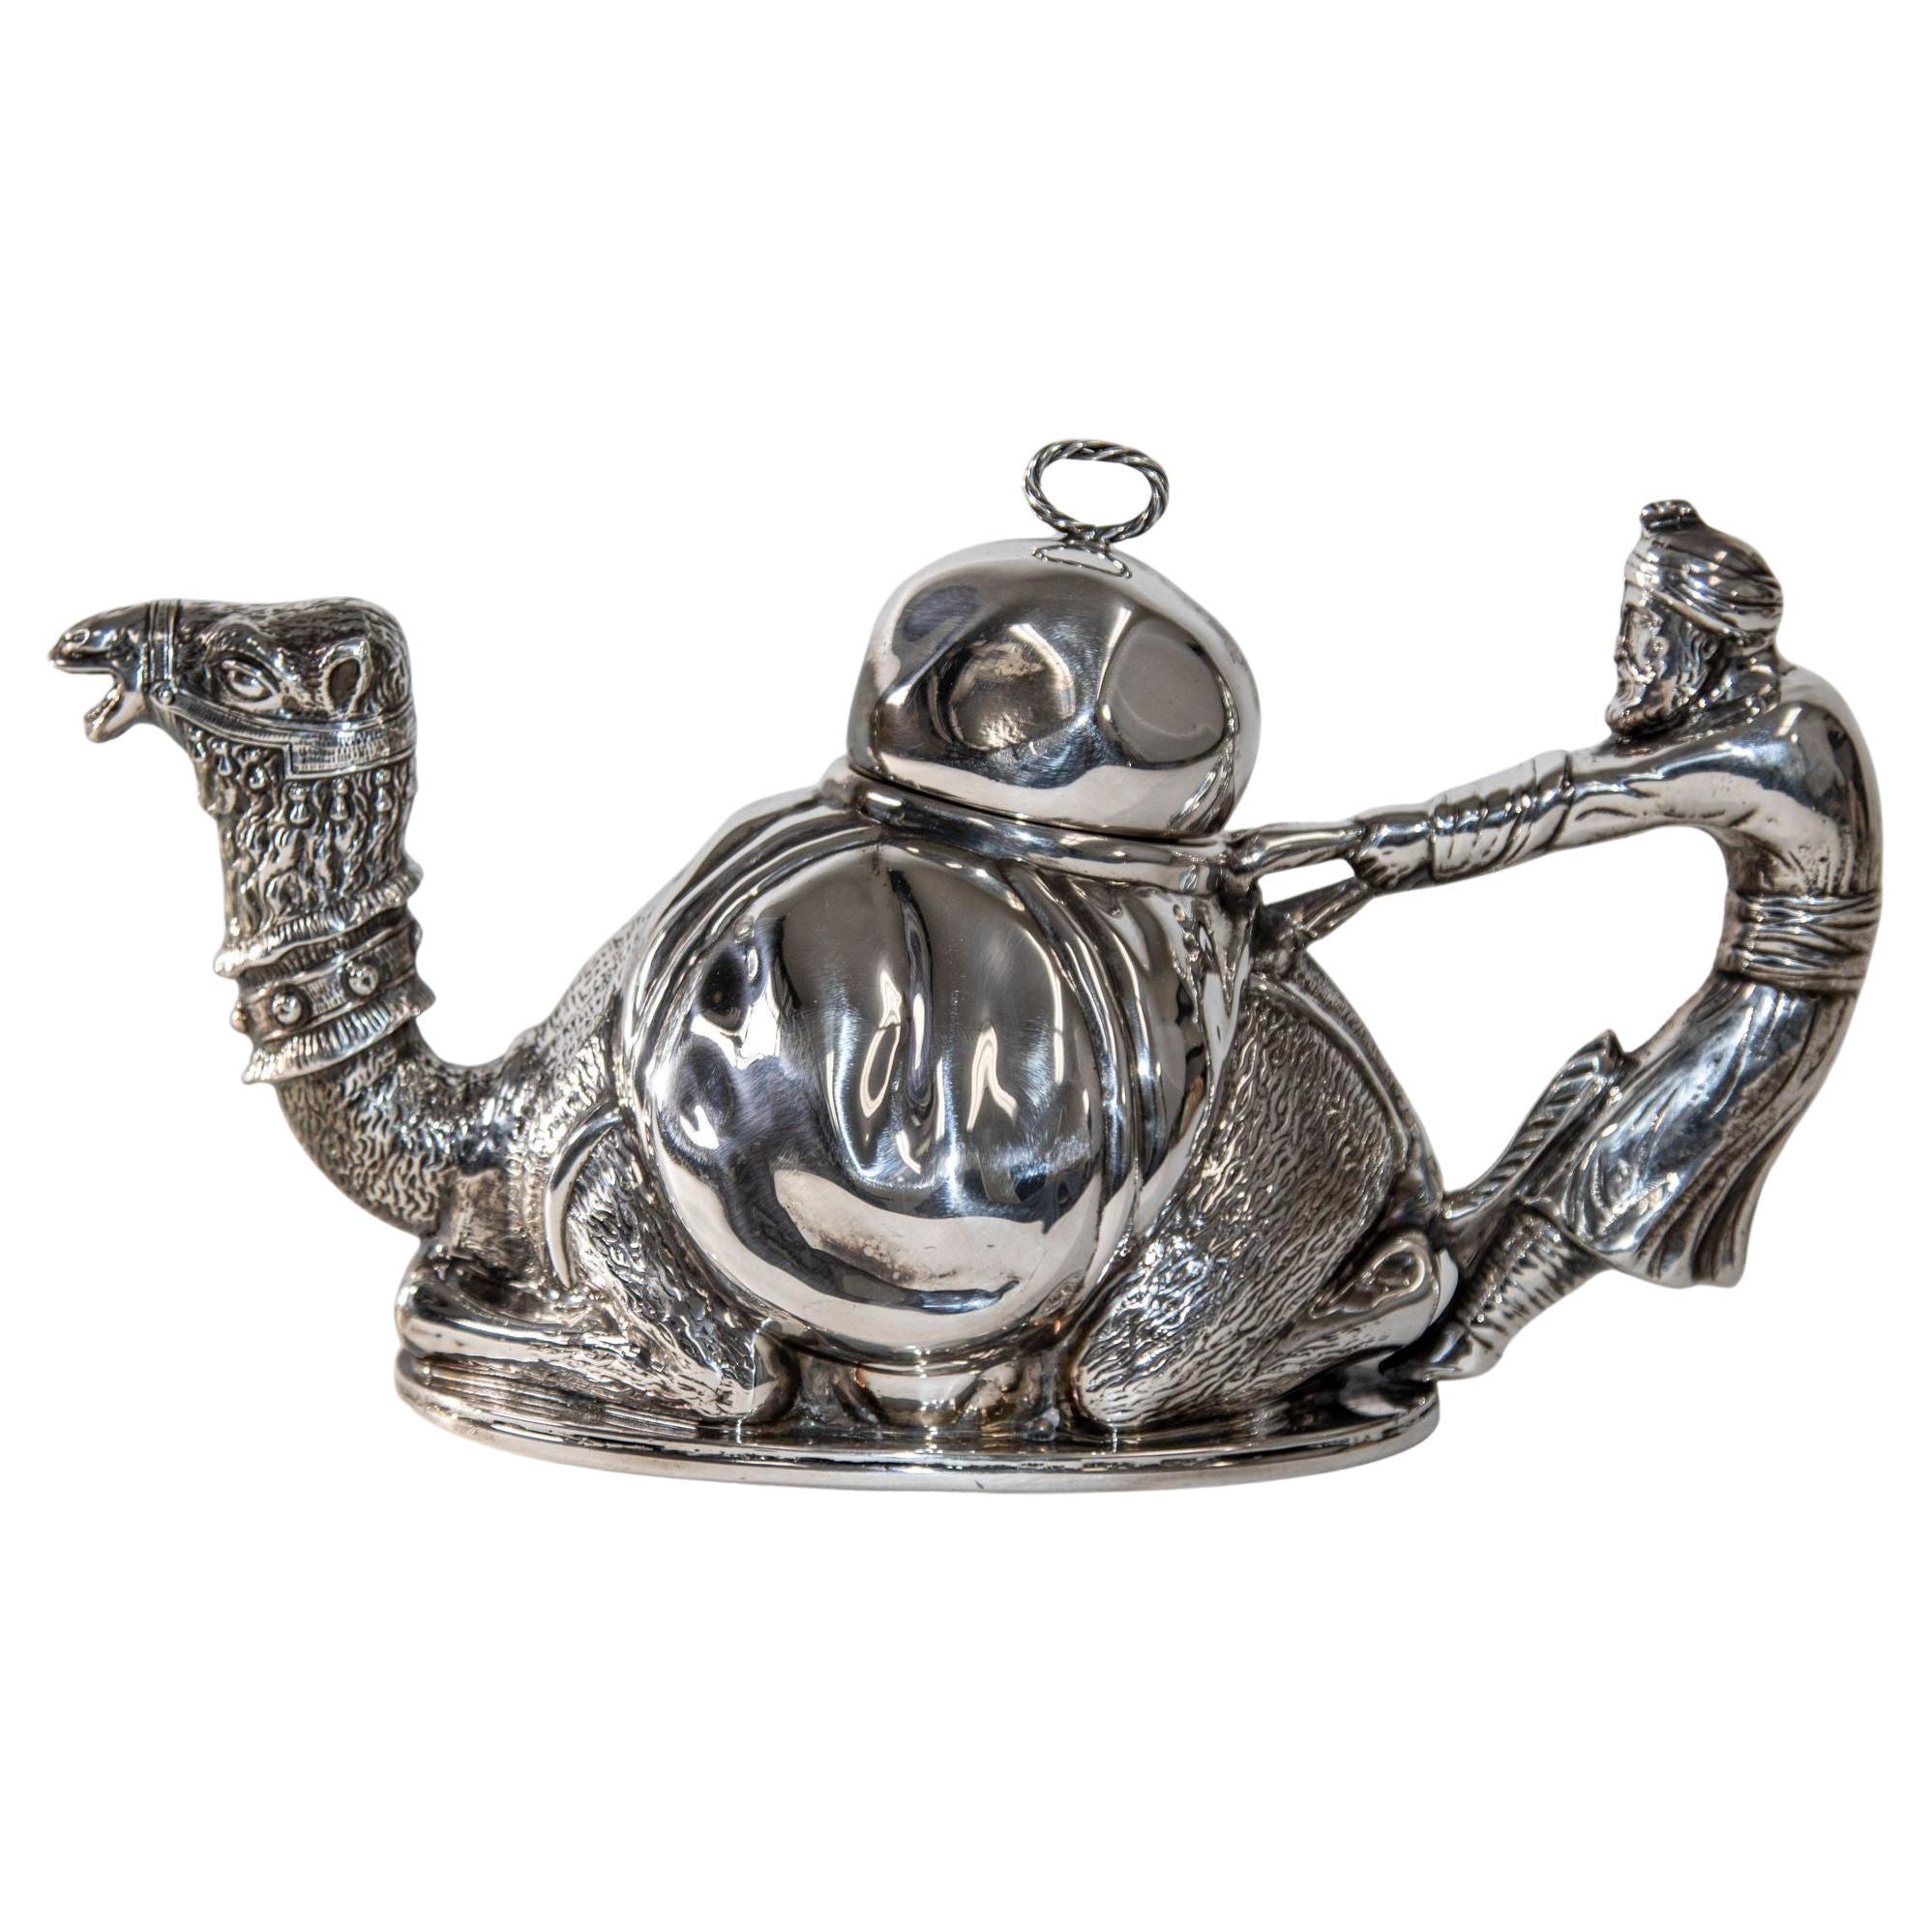 Camel Form "Karawan" Silver-Plated Teapot by Mariage Freres Paris France For Sale